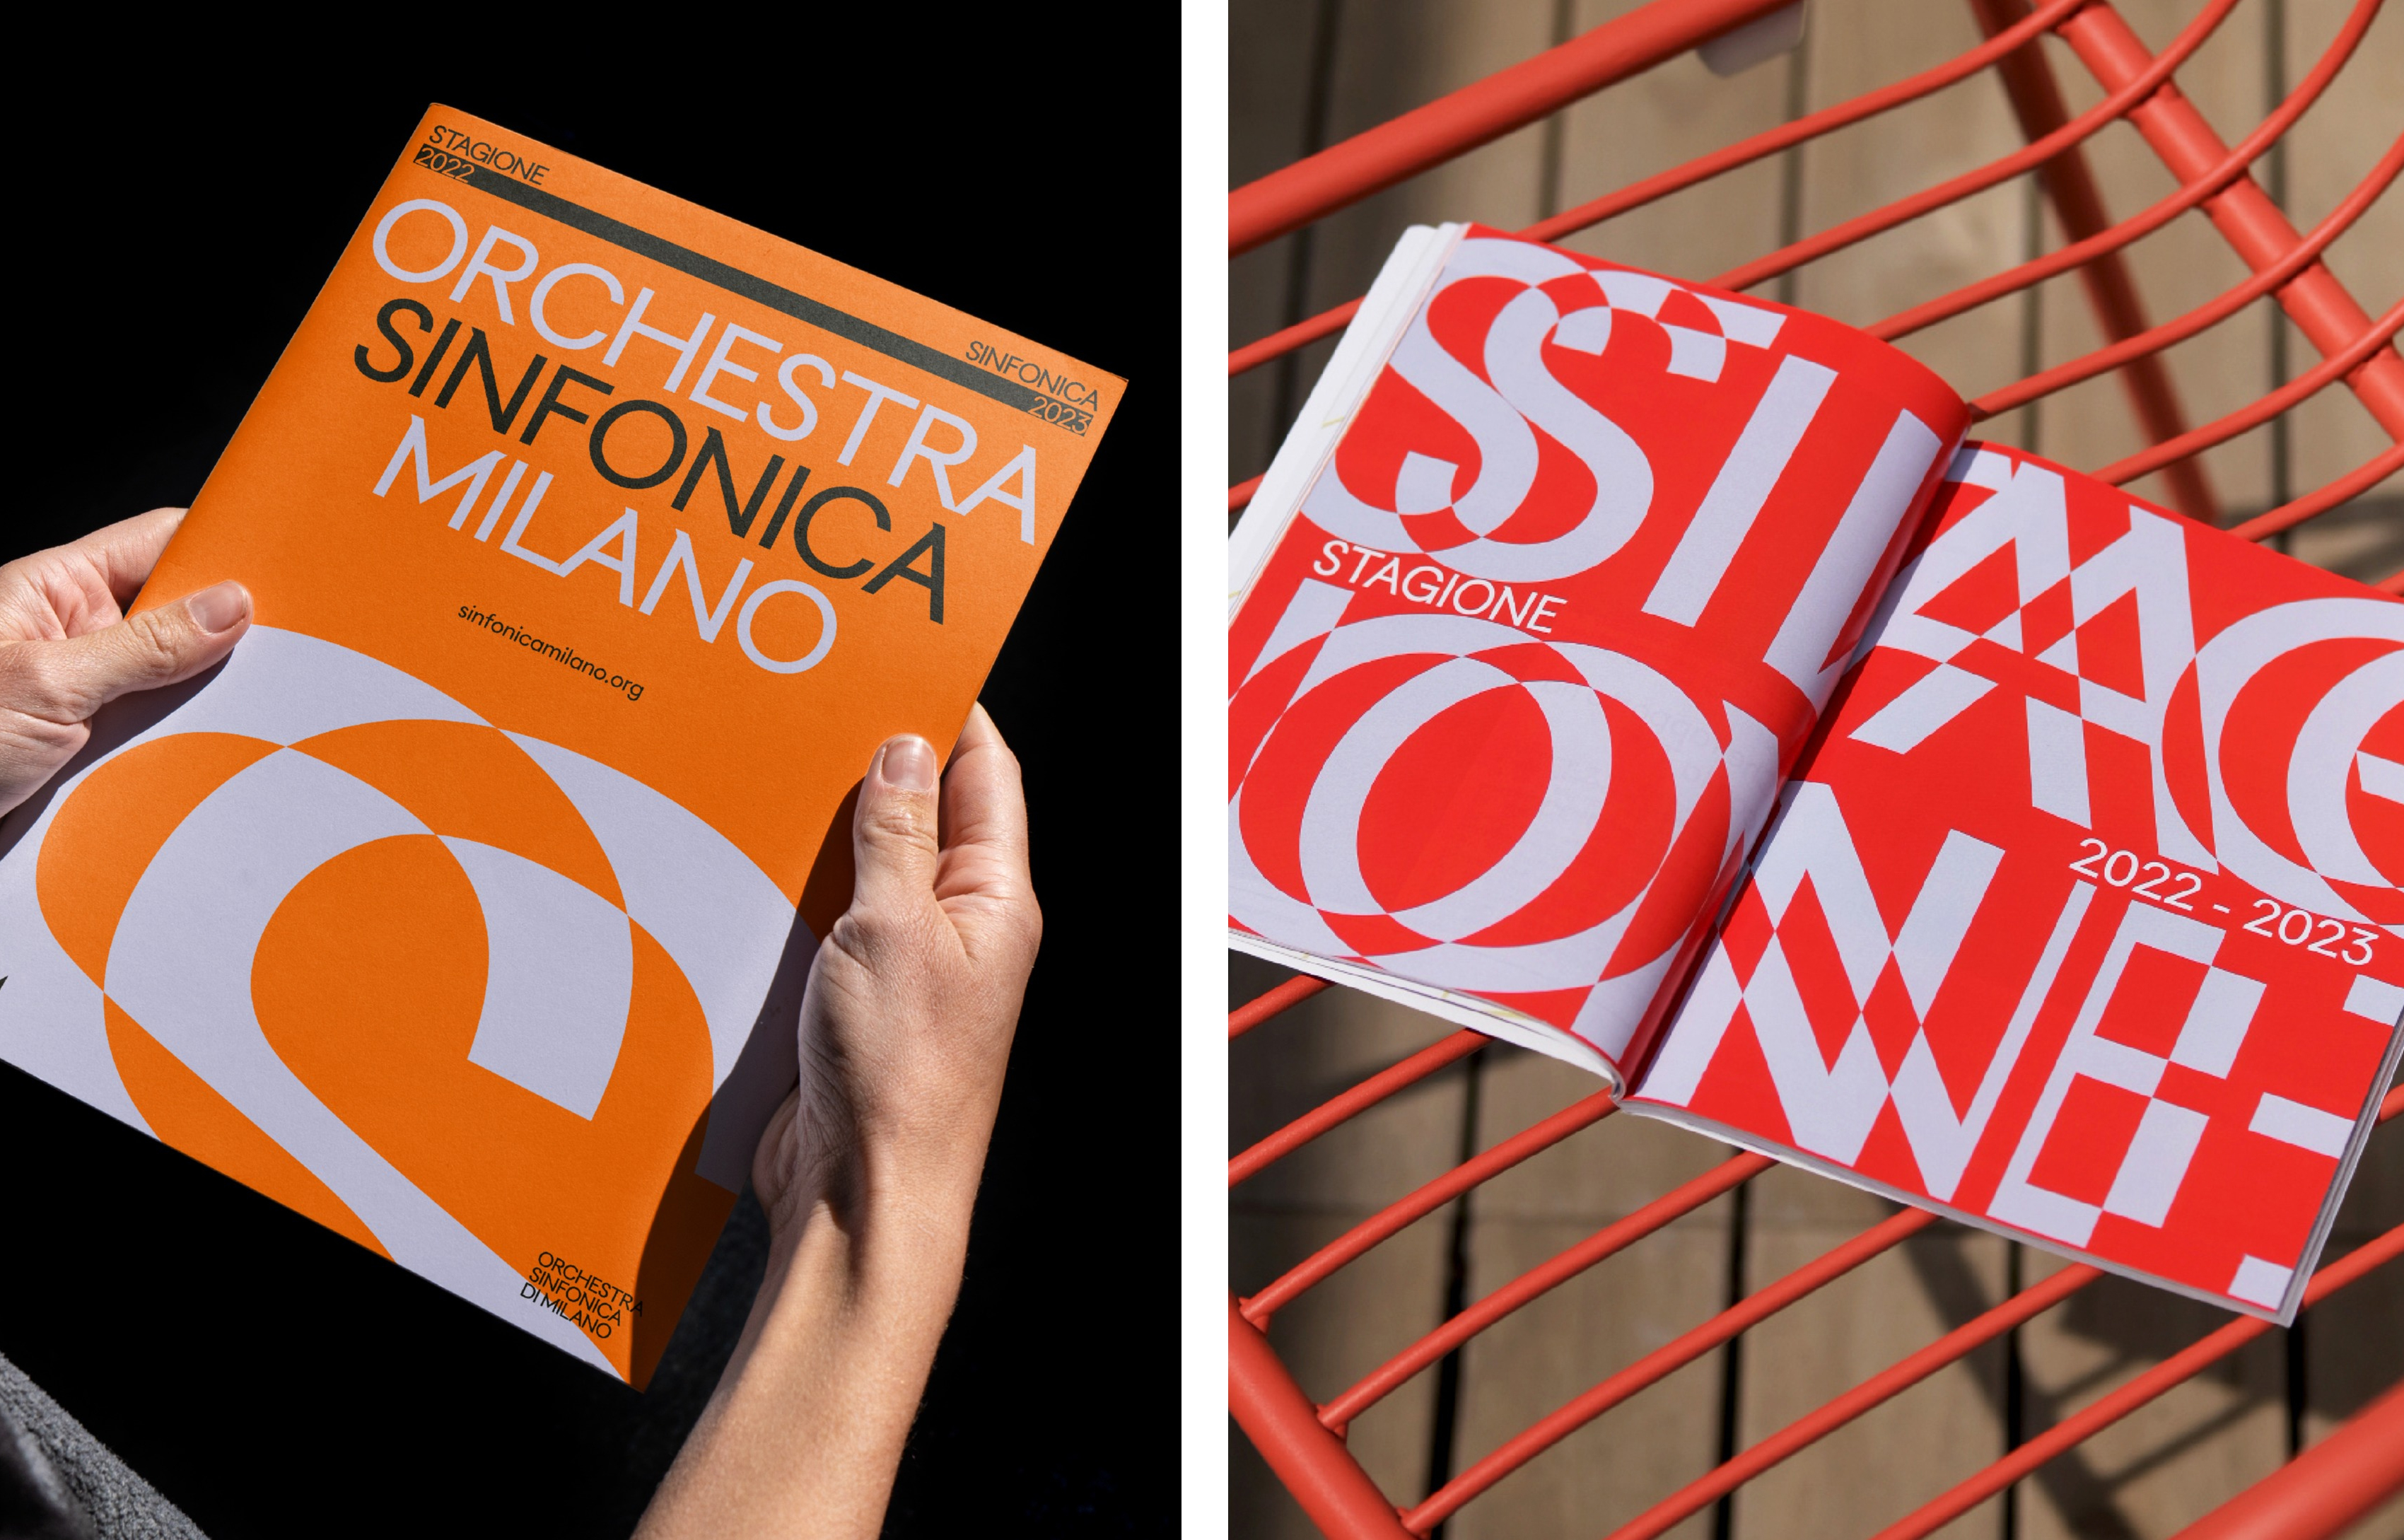 Brand identity and programme for Orchestra Sinfonica di Milano designed by Landor & Fitch 